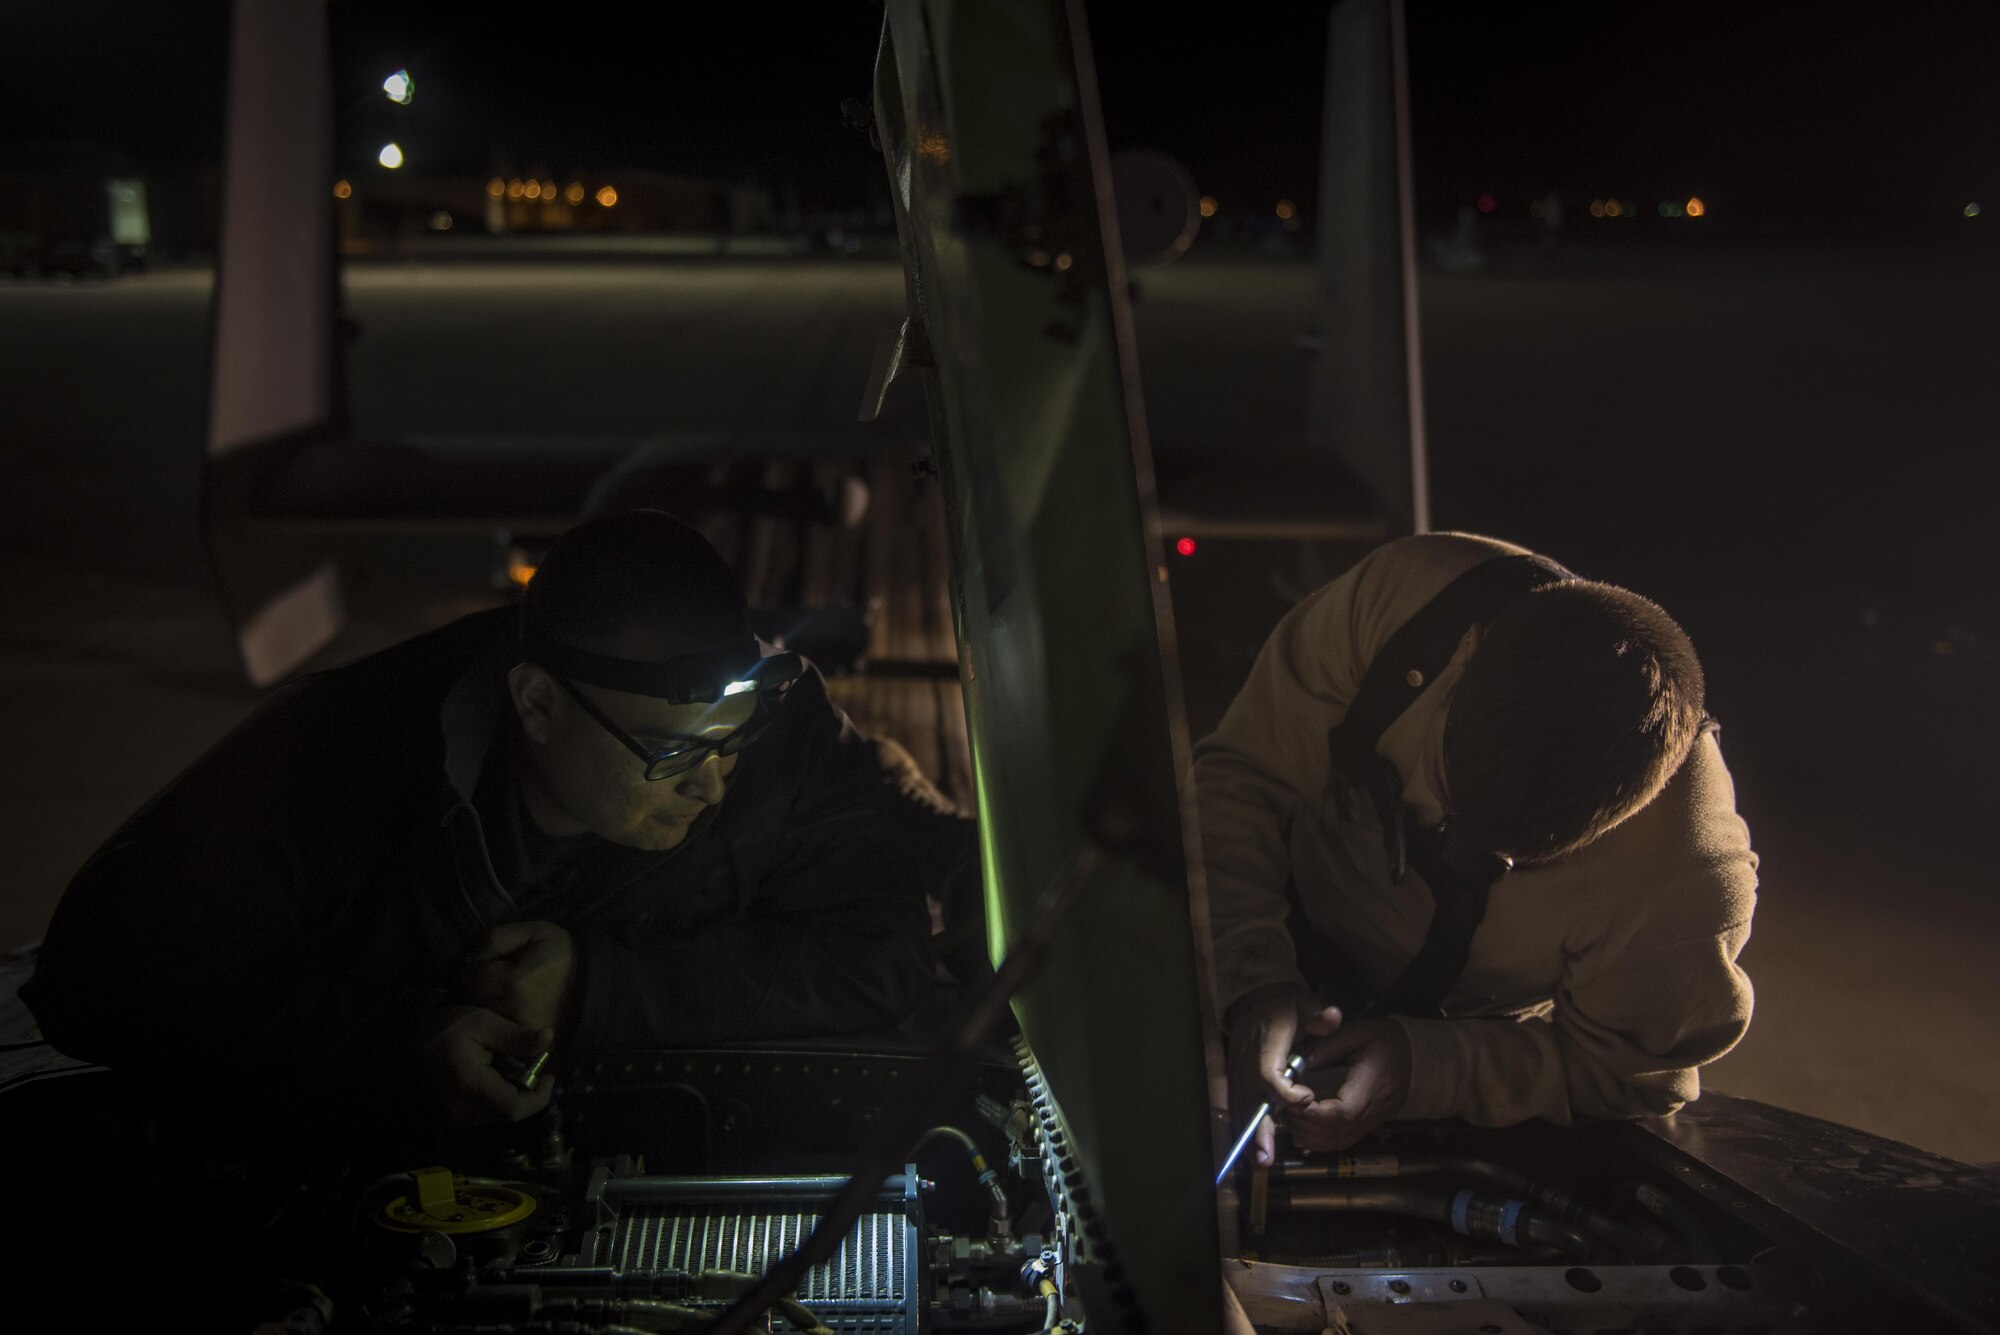 Civilian and active duty crew chiefs with the 20th Aircraft Maintenance Unit, 727th Special Operations Aircraft Maintenance Squadron work together to carefully extract a damaged part from a CV-22 Osprey Oct. 18, 2016 at Cannon Air Force Base, N.M. The 20th Aircraft Maintenance Unit is one of many shops at Cannon that operates 24 hours a day, keeping the 27th Special Operations Wing ready, relevant and resilient any time, any place. (U.S. Air Force Photo by Senior Airman Shelby Kay-Fantozzi/released)